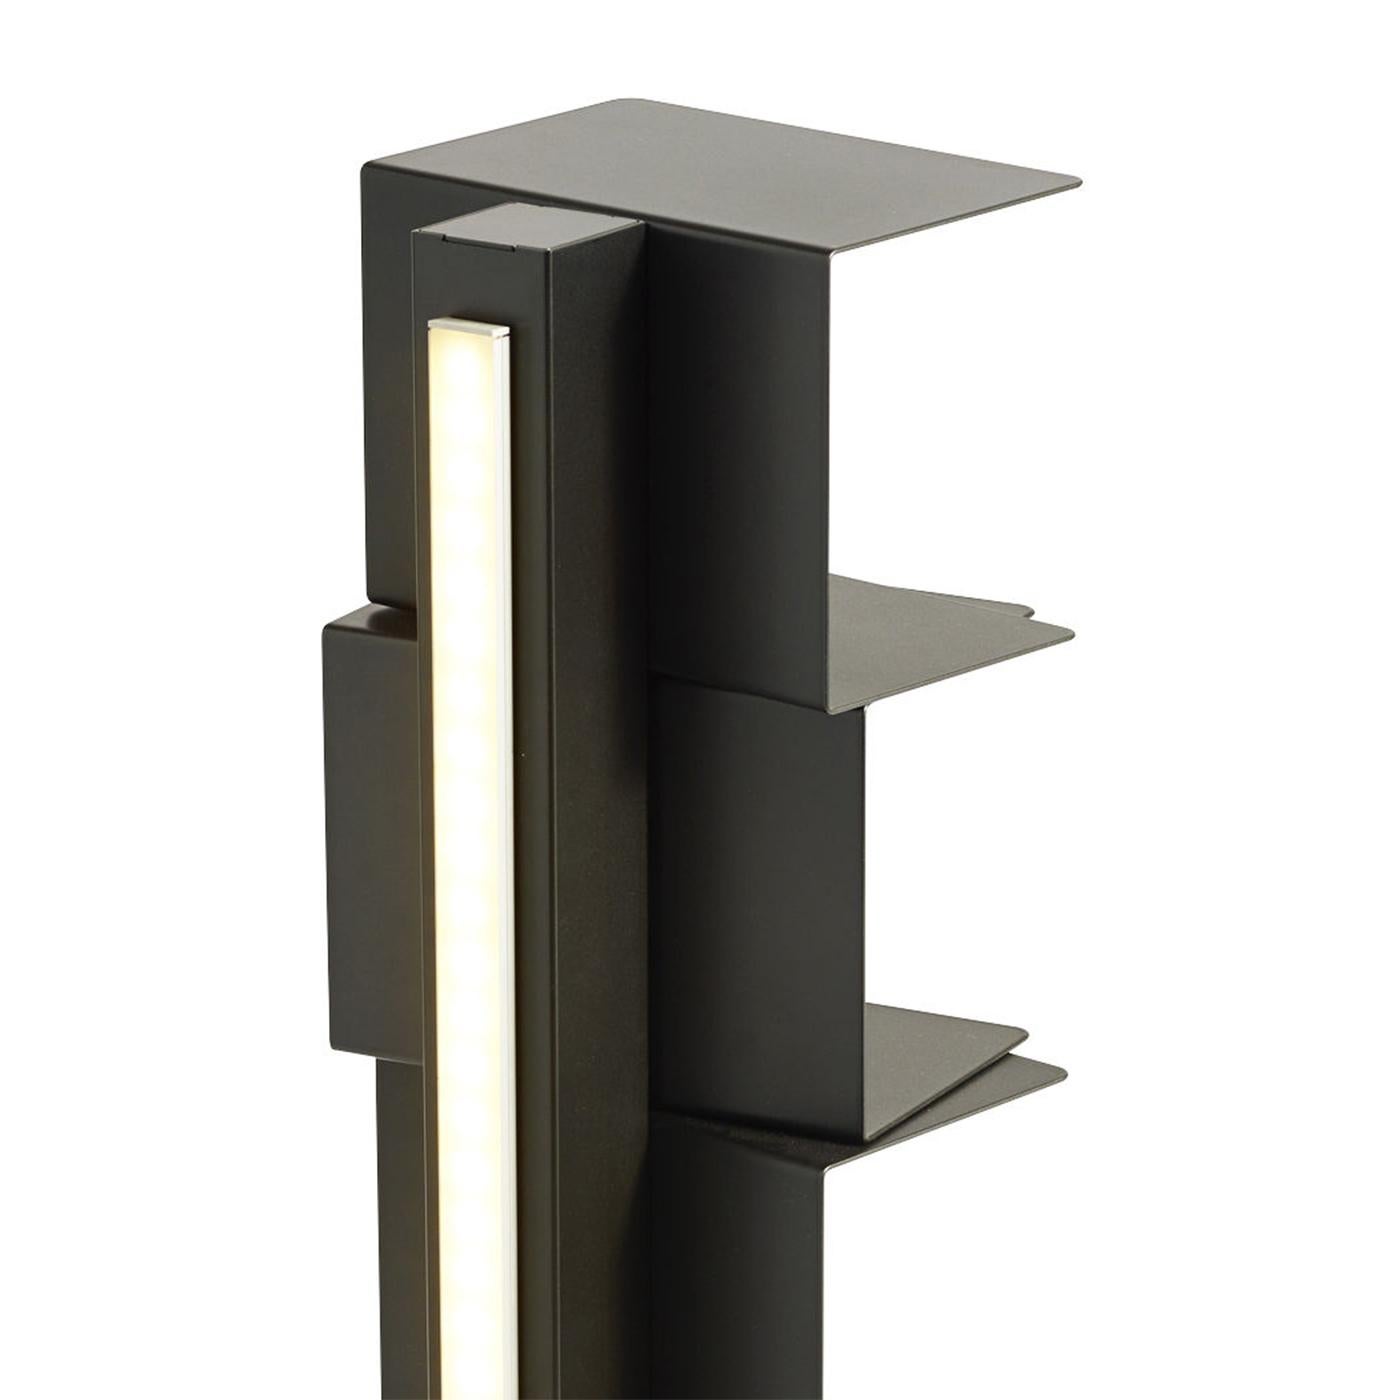 Bookcase Lumina A with all structure in steel in 
black matte finish. Bookcase with LED light, 220V
in 2700°K. With 2,5 meters transparent wiring and 
plug. With adjustable feet. Self dimension 12 x 13 cm.
Height between shelves: 13cm. Base: 26